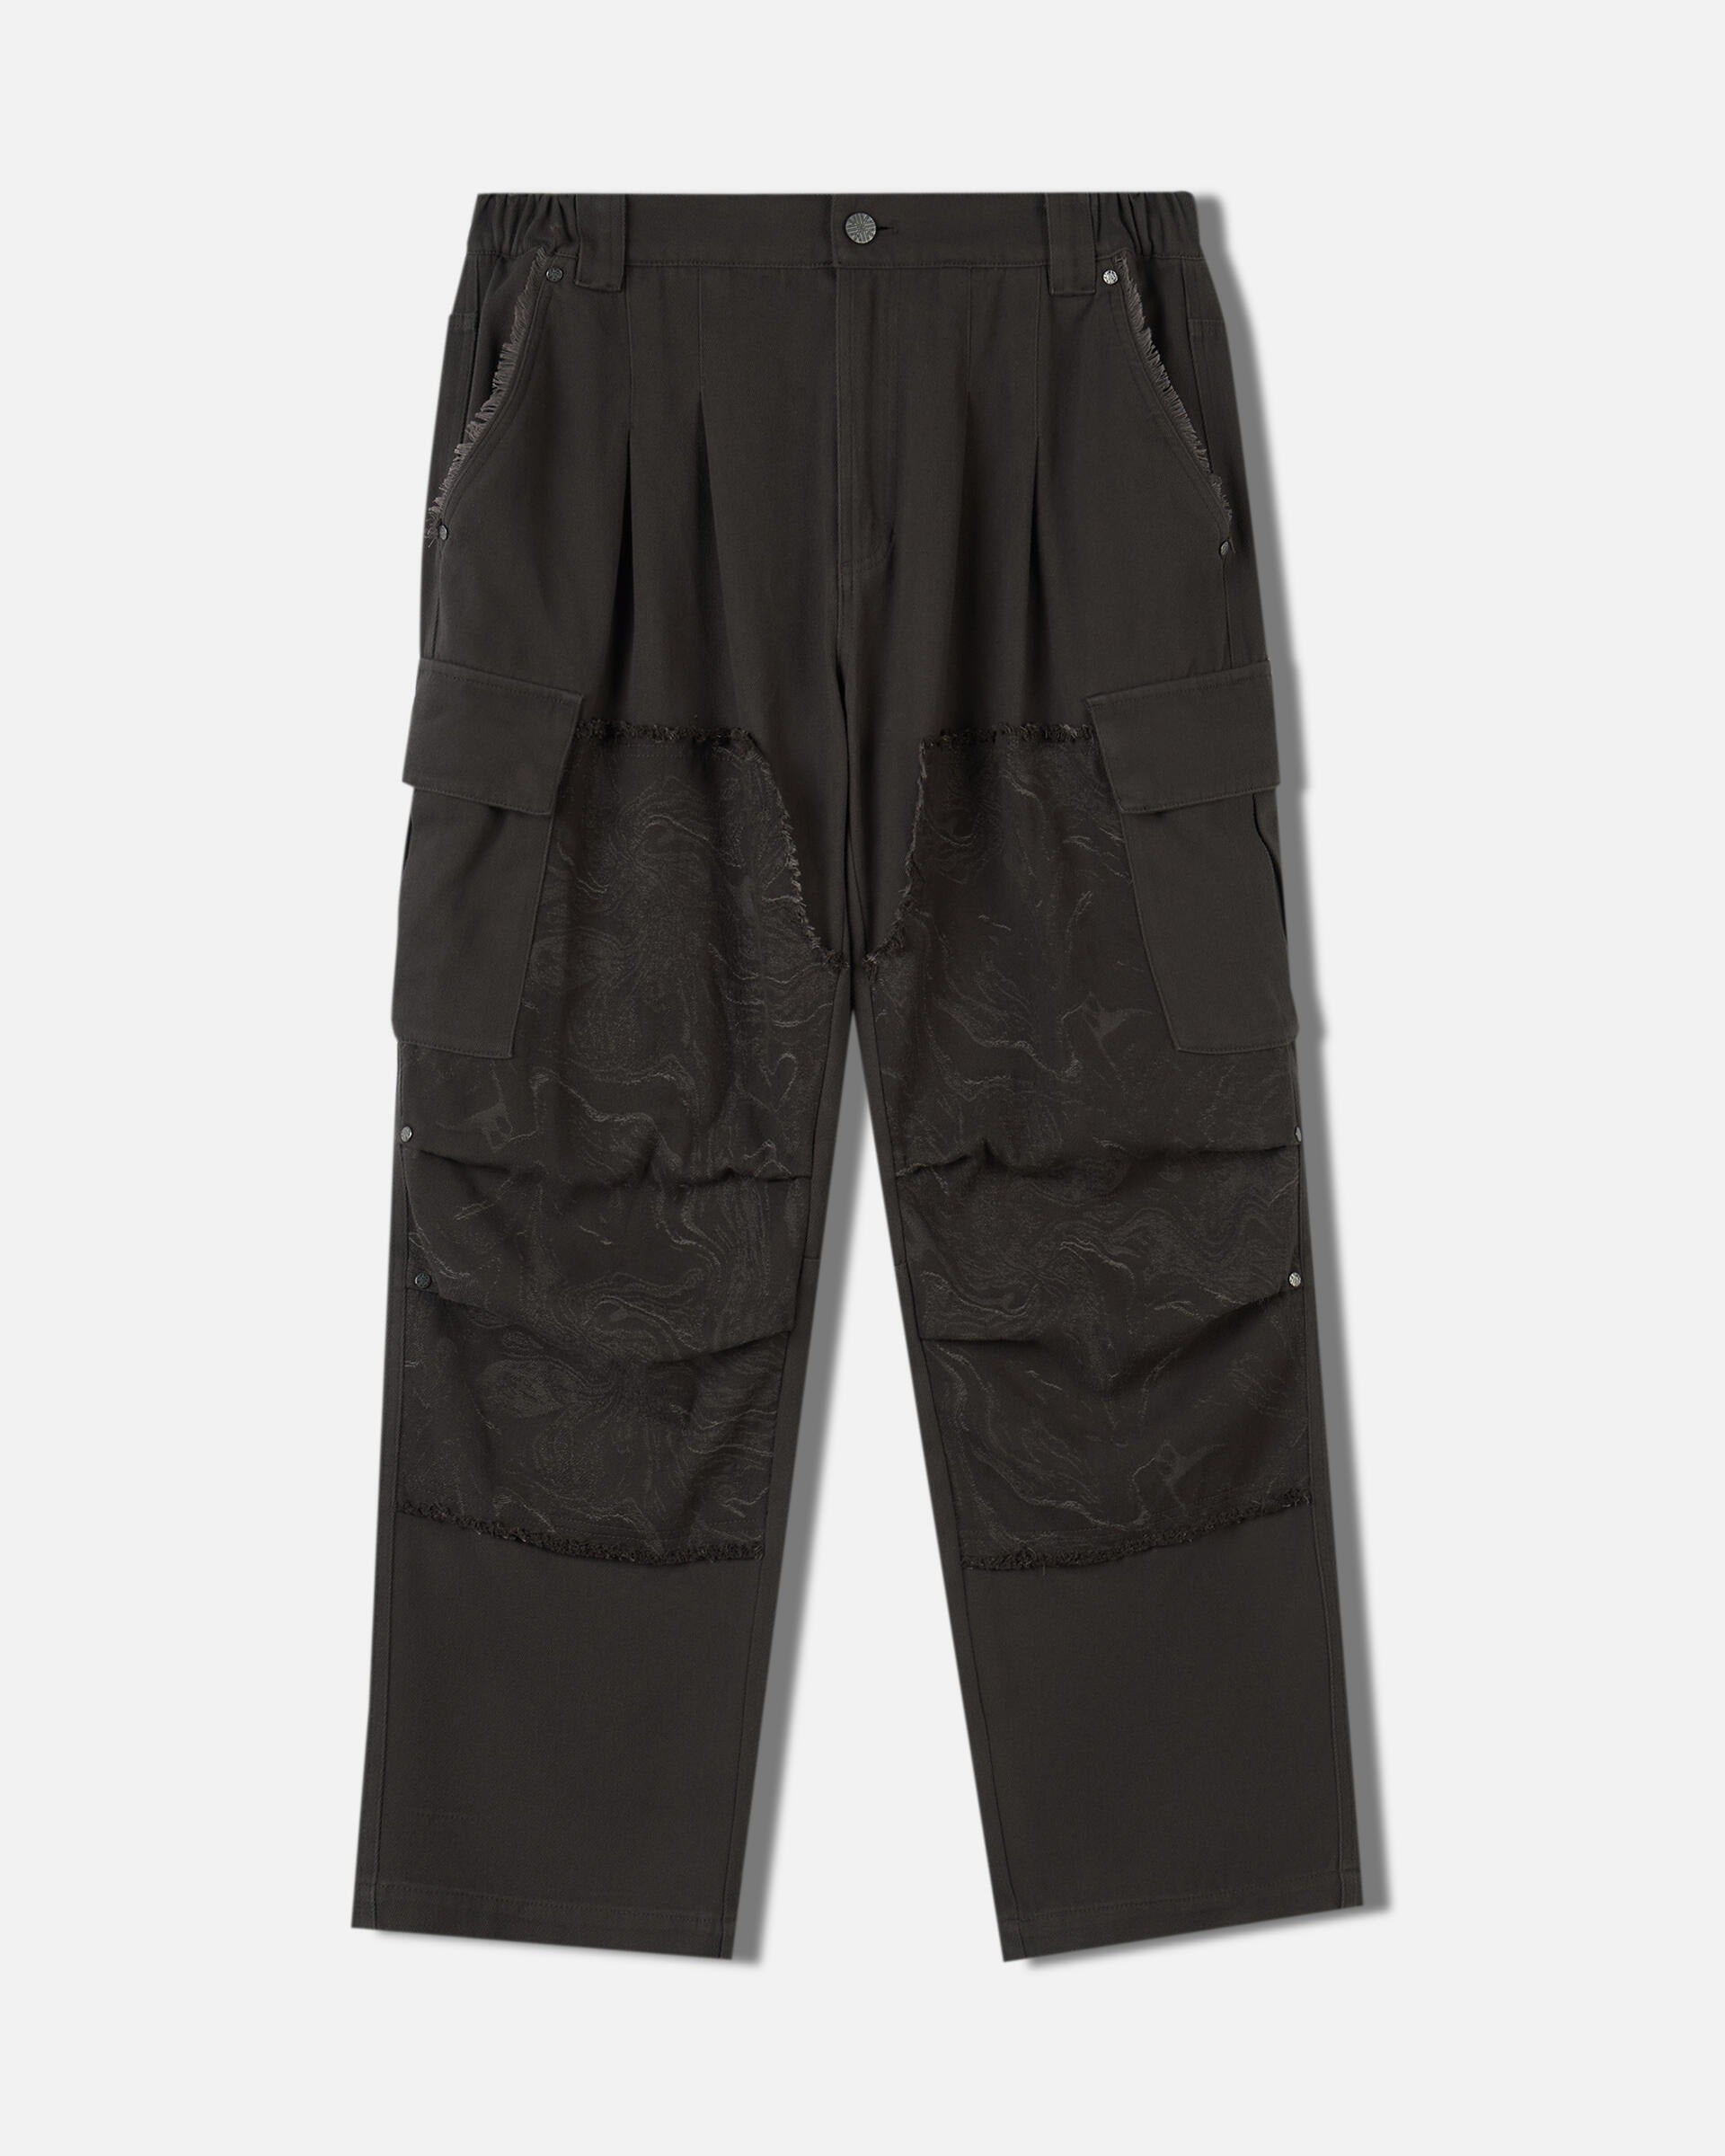 Staple Puma x Staple Washed Sweatpant “Year Of The Dragon”